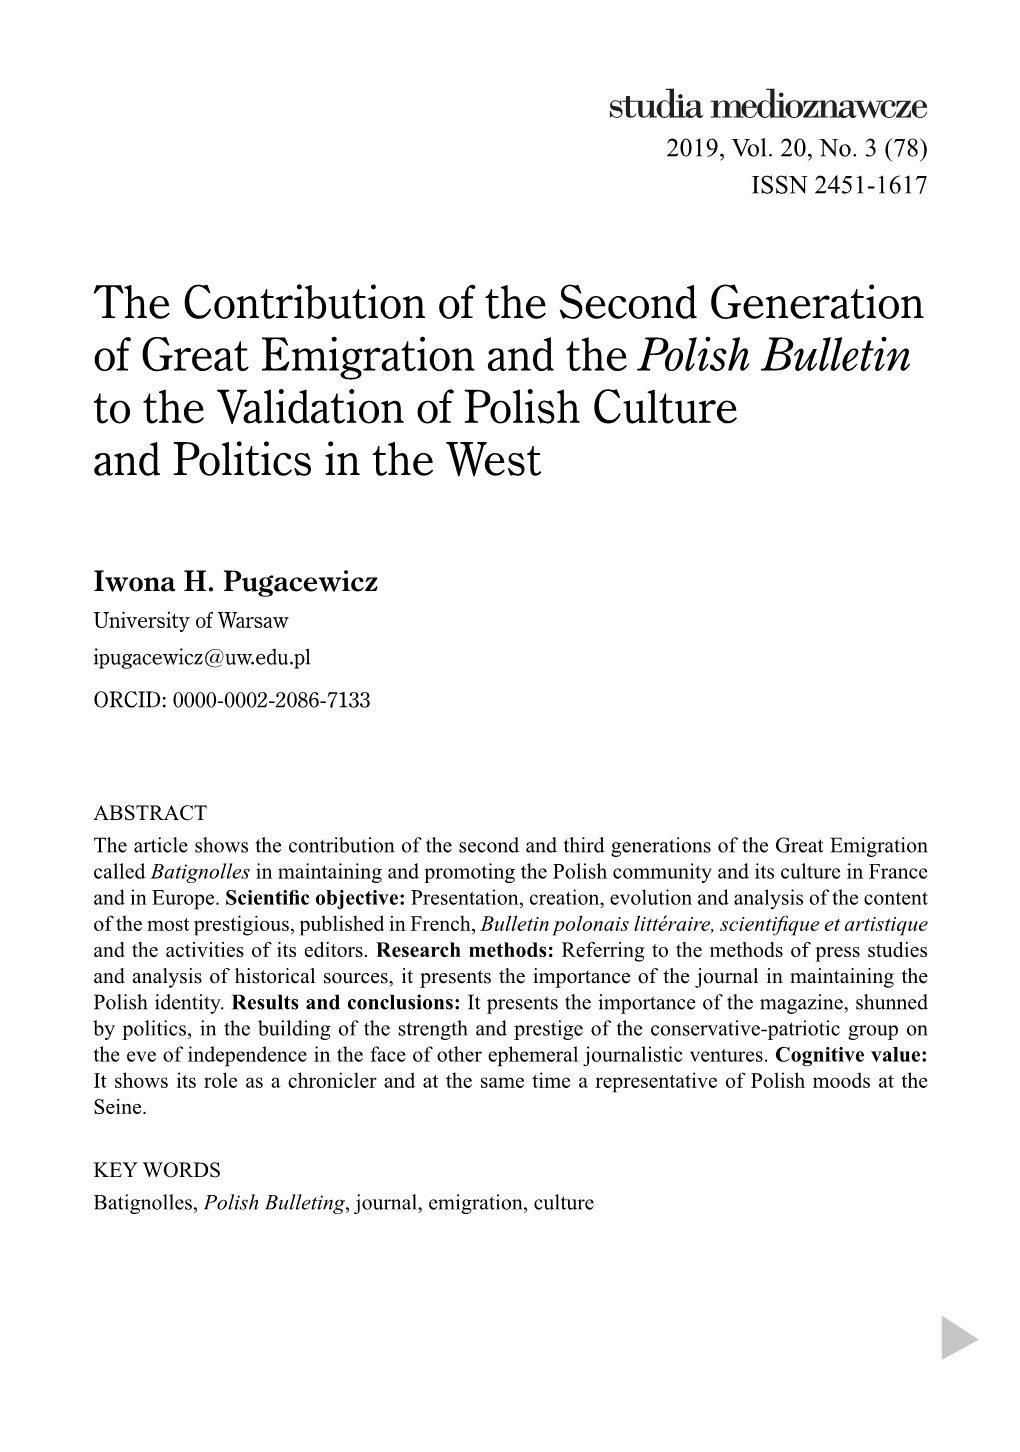 The Contribution of the Second Generation of Great Emigration and the Polish Bulletin to the Validation of Polish Culture and Politics in the West